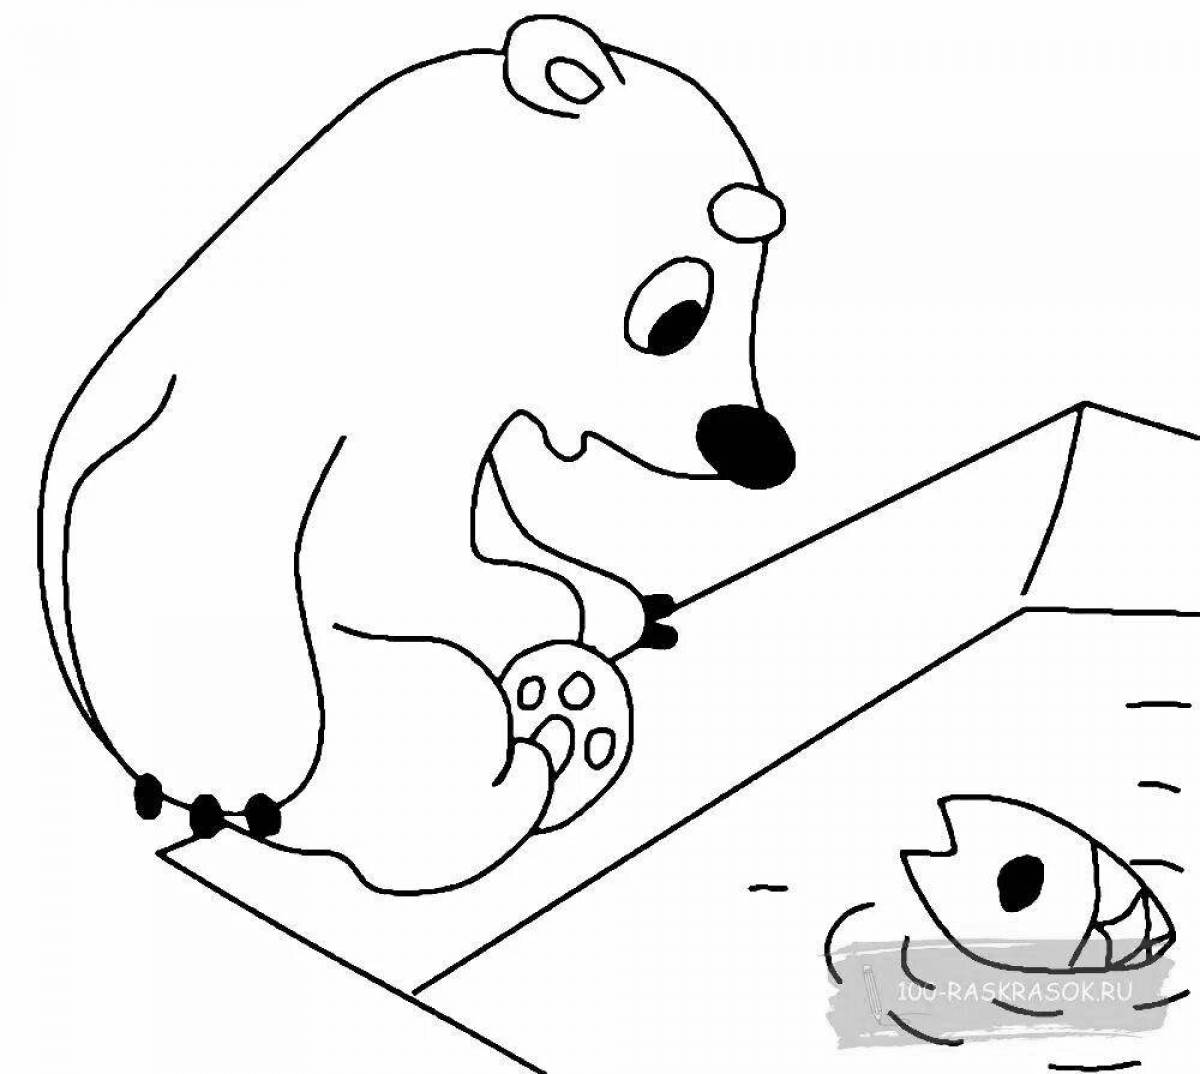 Coloring page adorable polar bear on ice